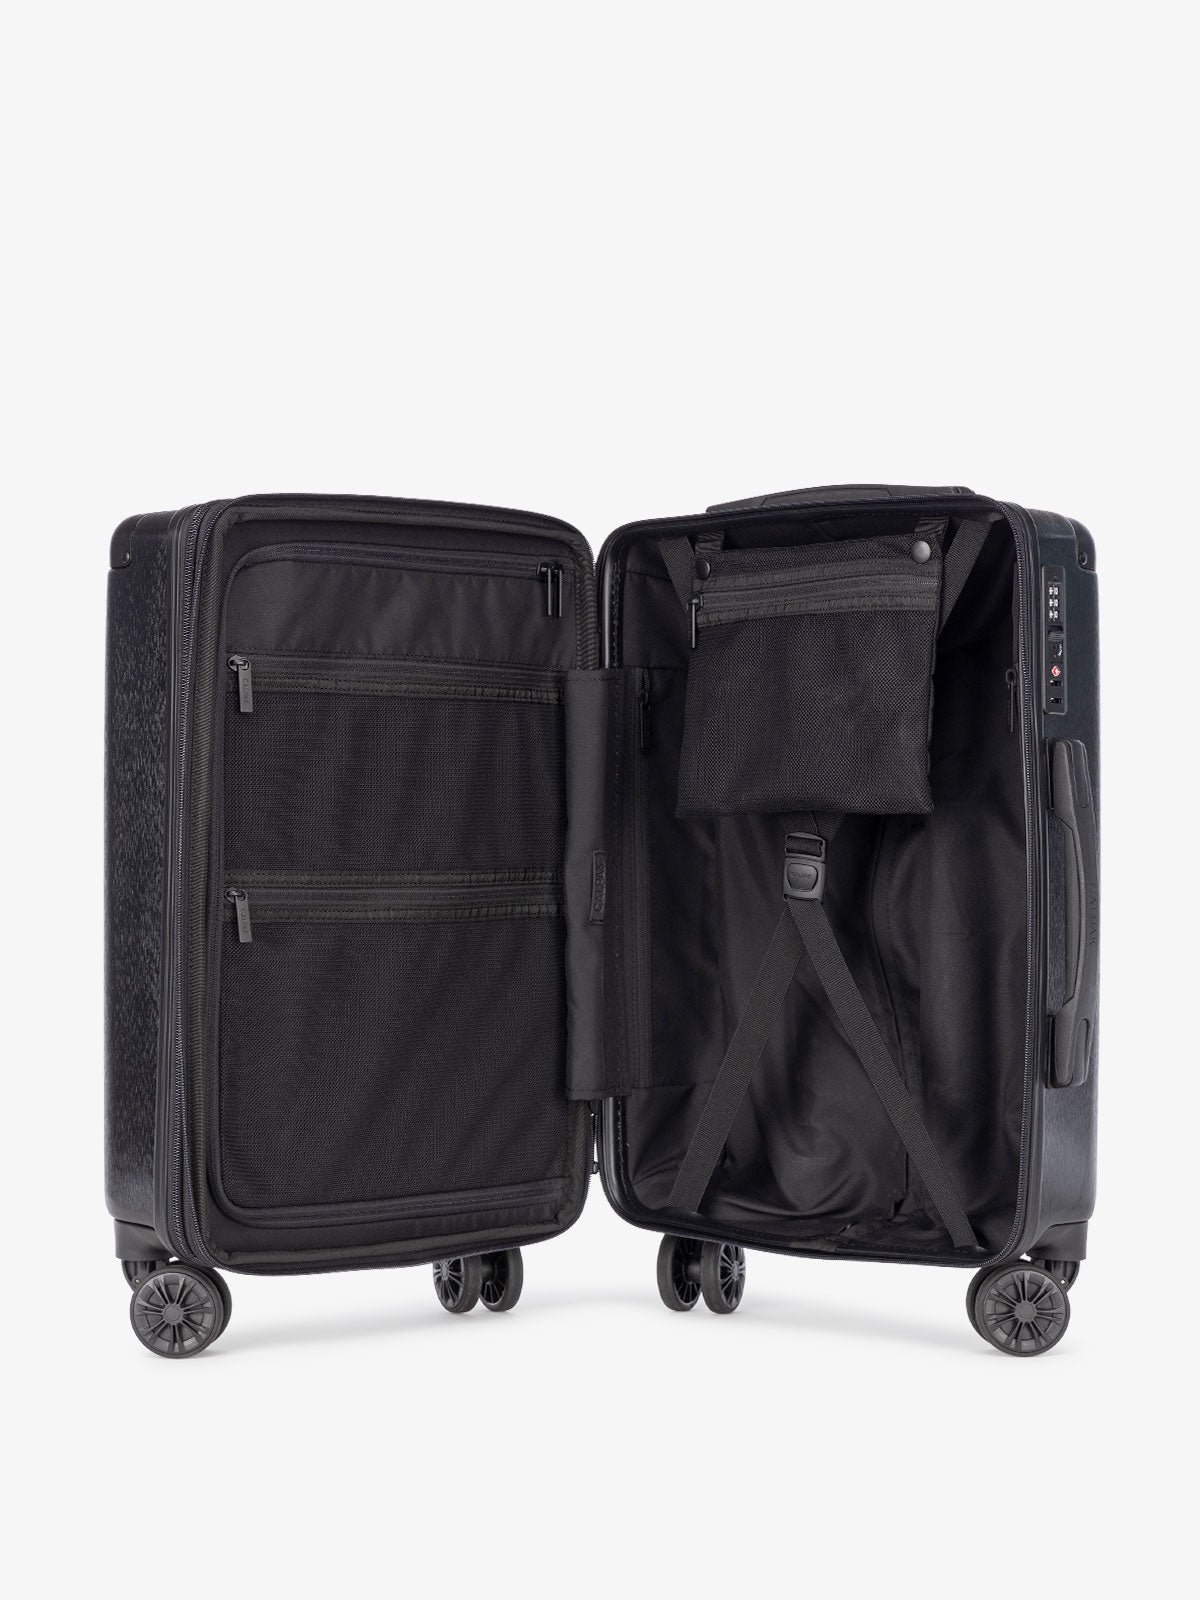 hard sided part of 3 piece suitcase set with compression strap